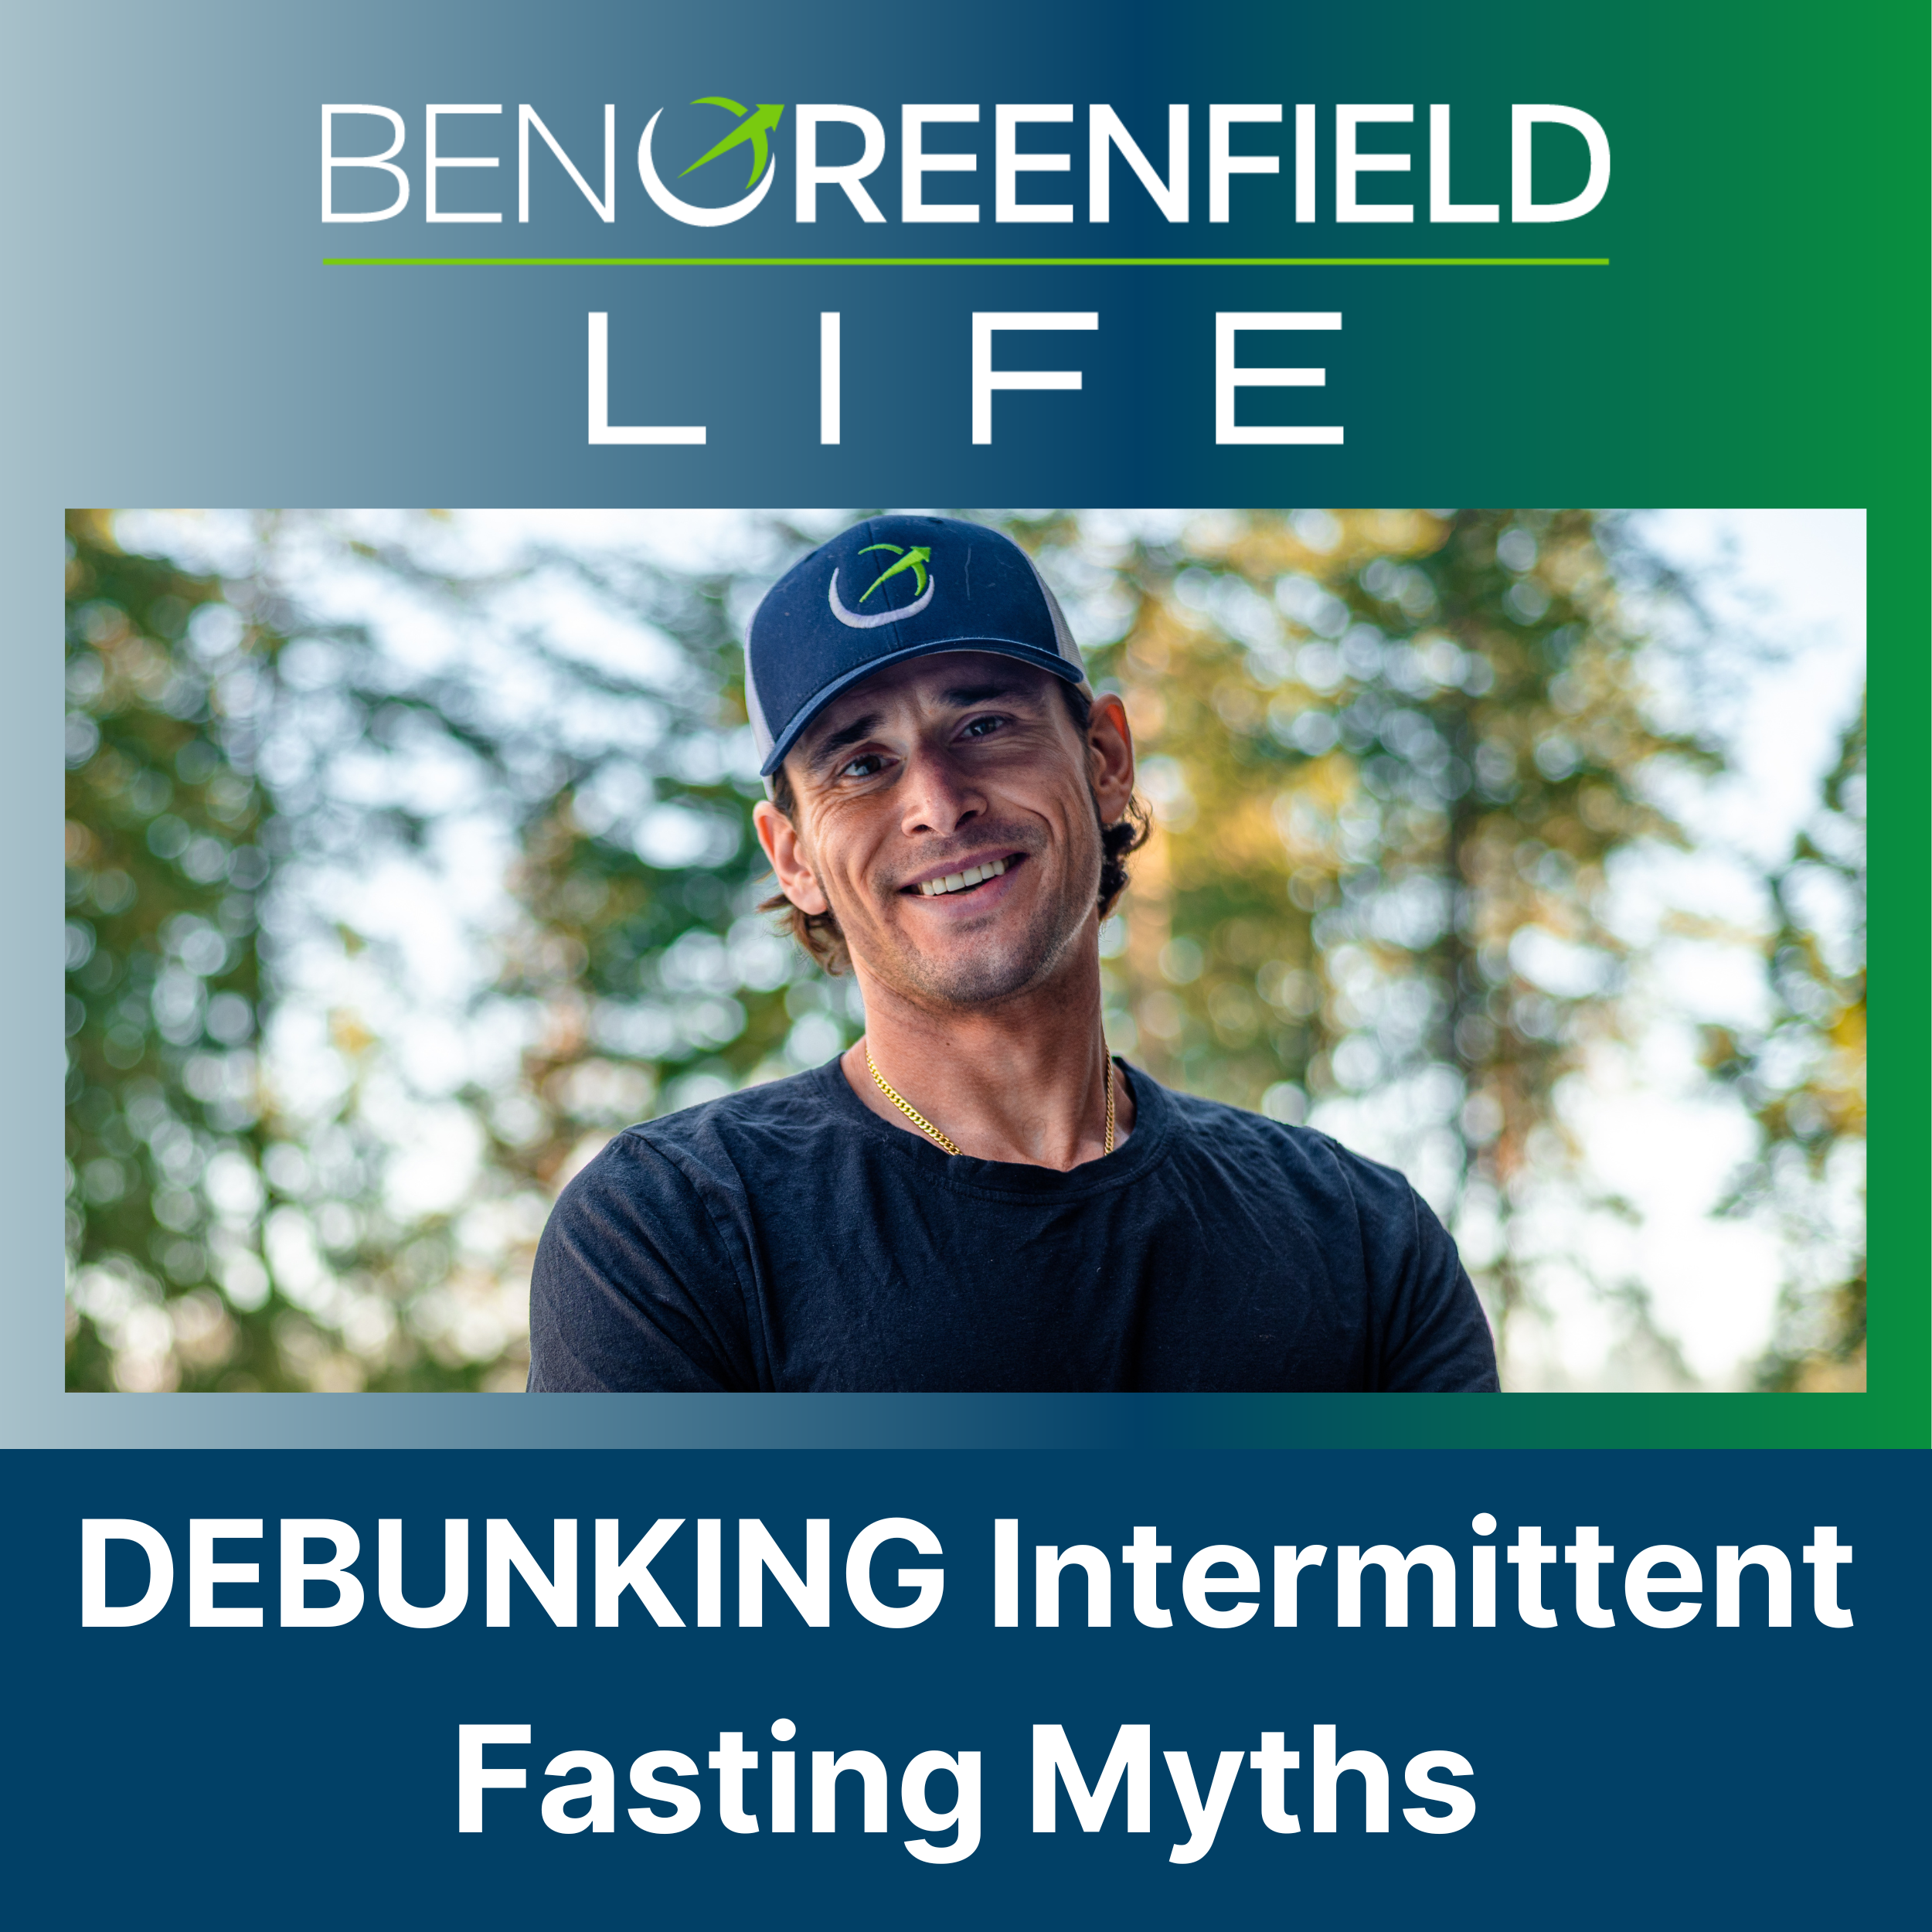 DEBUNKING Intermittent Fasting Myths: SHOCKING New Study Raises HEART DISEASE Risk Concerns! Solosode 473